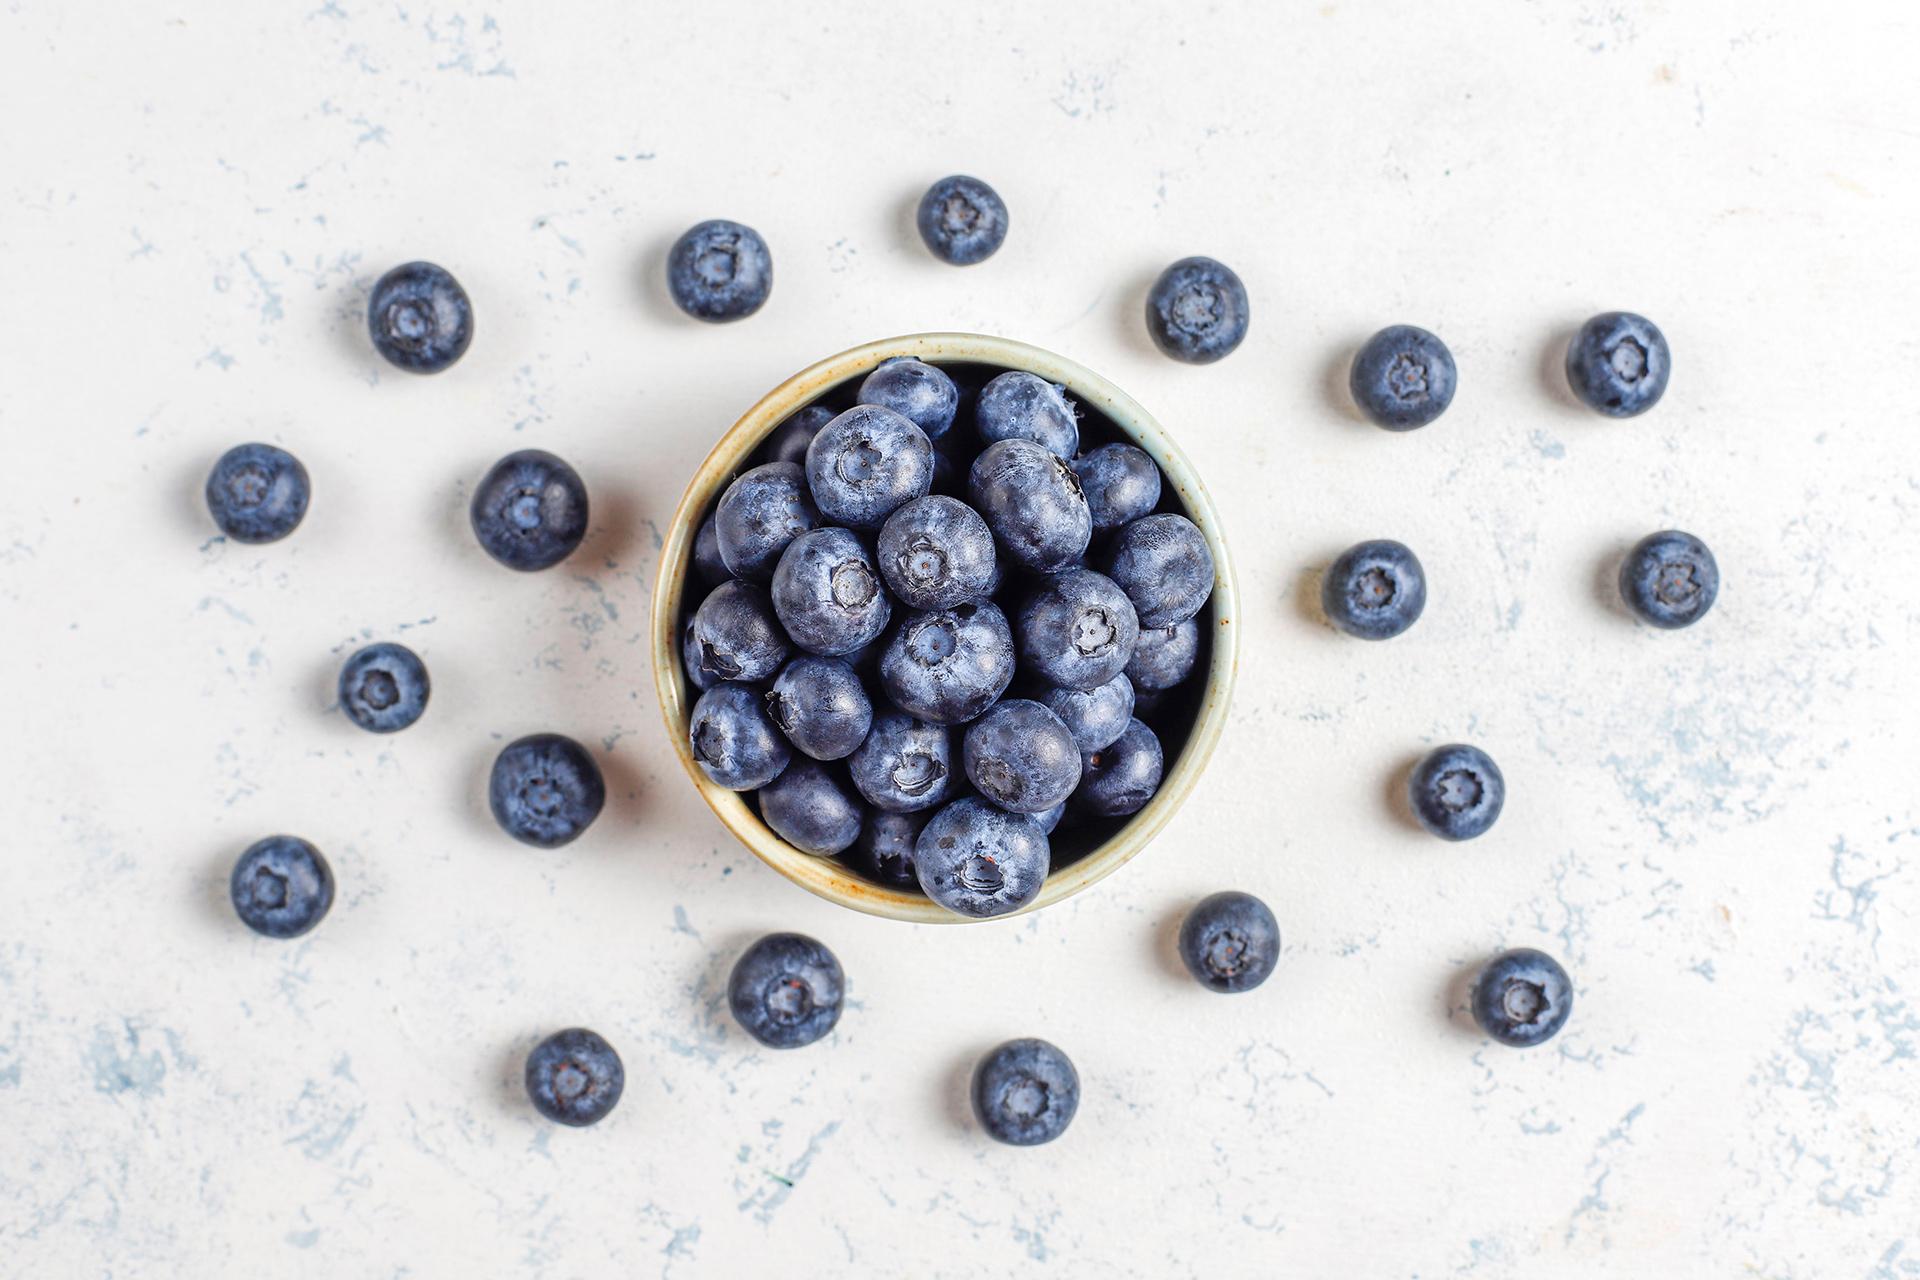 Health Benefits of Blueberries: How do They Promote Good Heart Health?